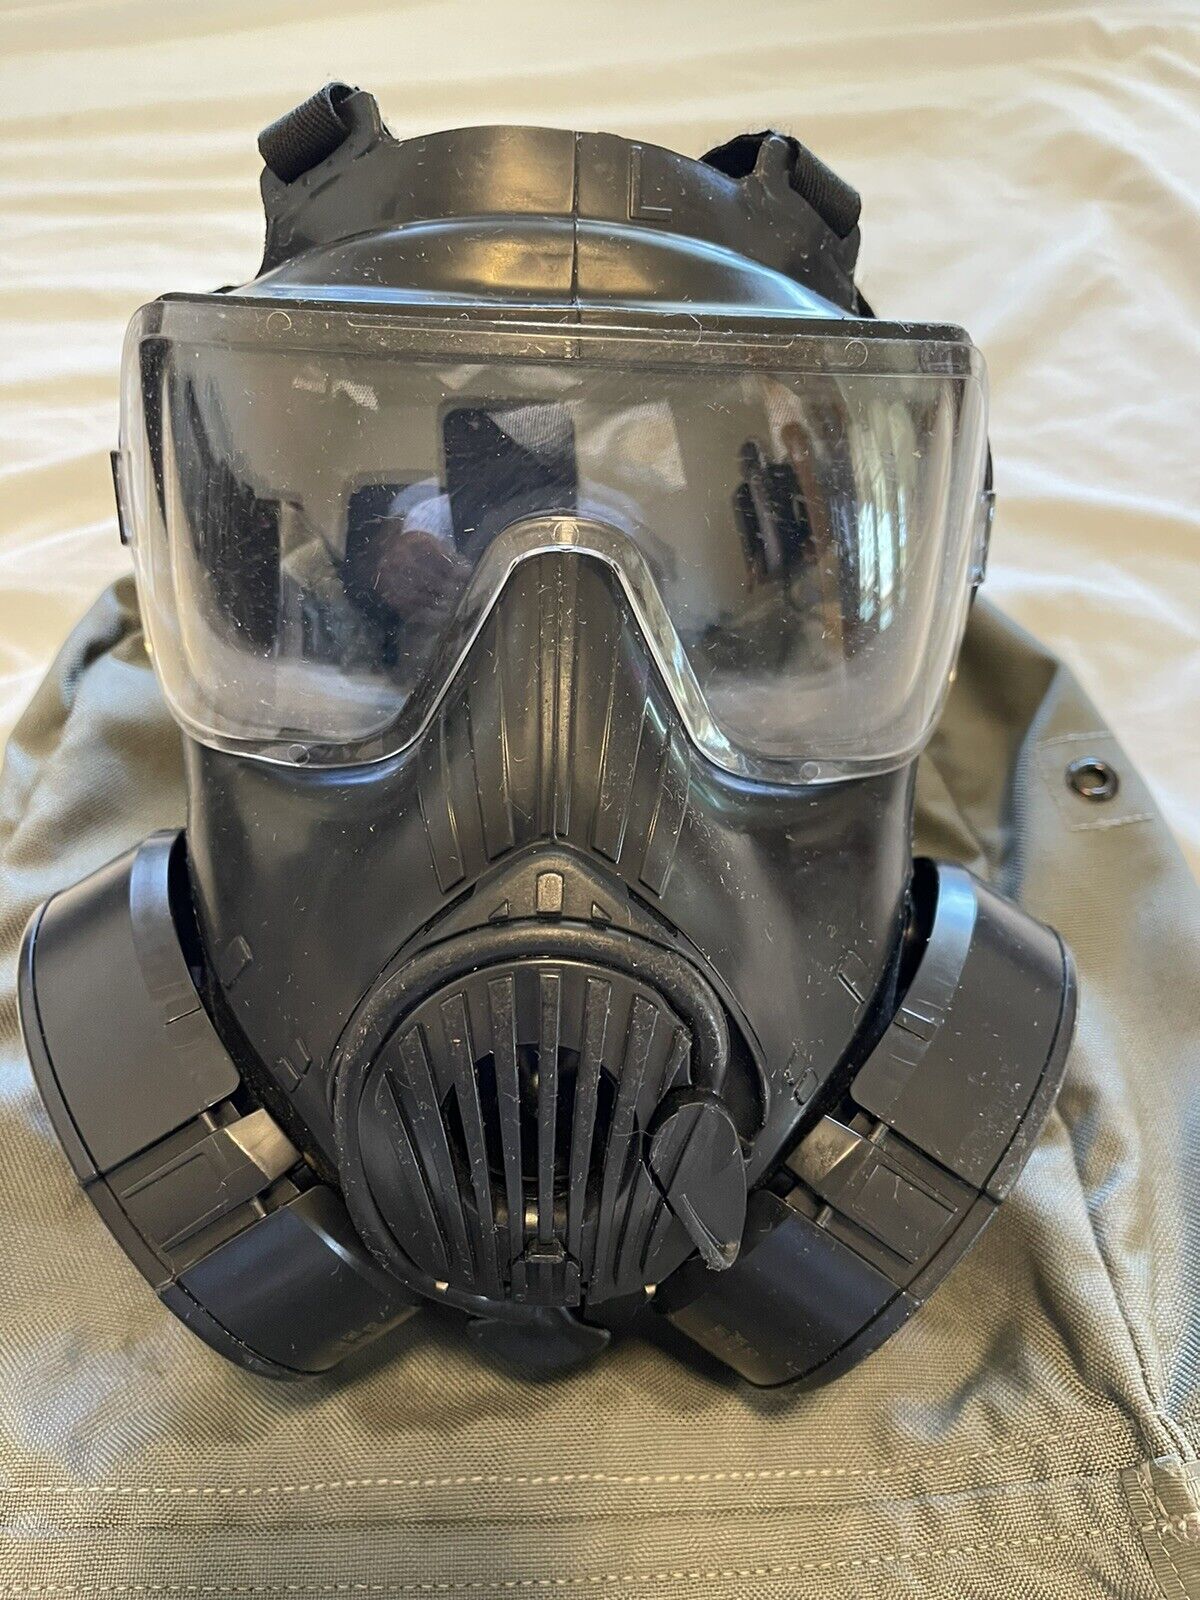 US MILITARY AVON M50 CBRN / NBC PROTECTIVE GAS MASK  W/CARRY BAG SIZE LARGE